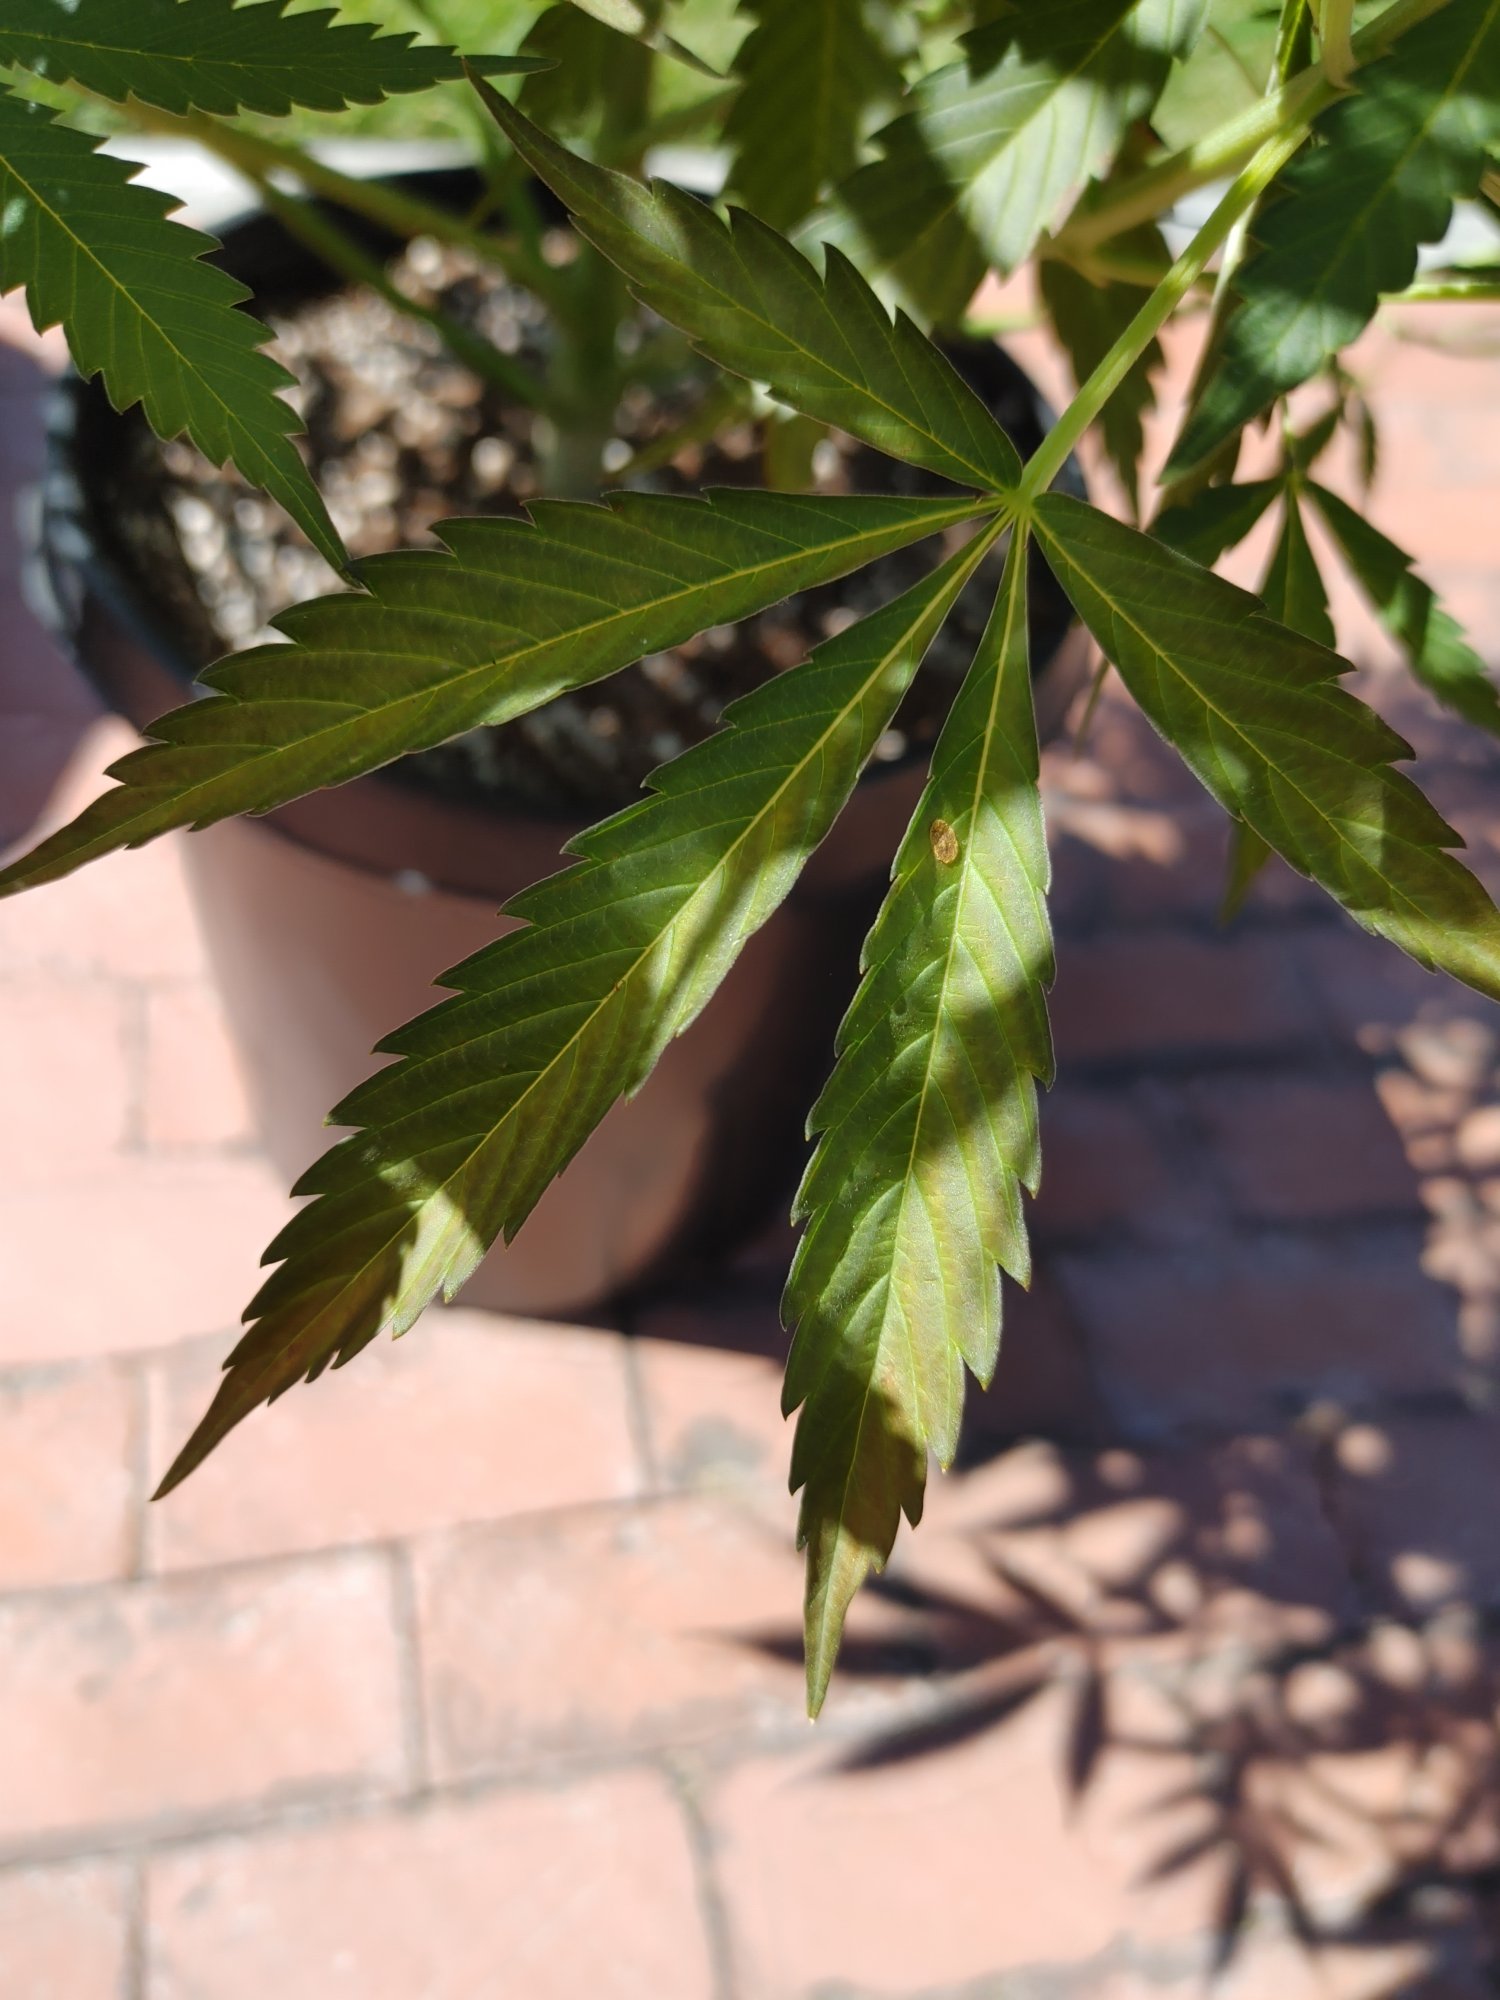 Need assistance with outdoor grow issues wpics 3